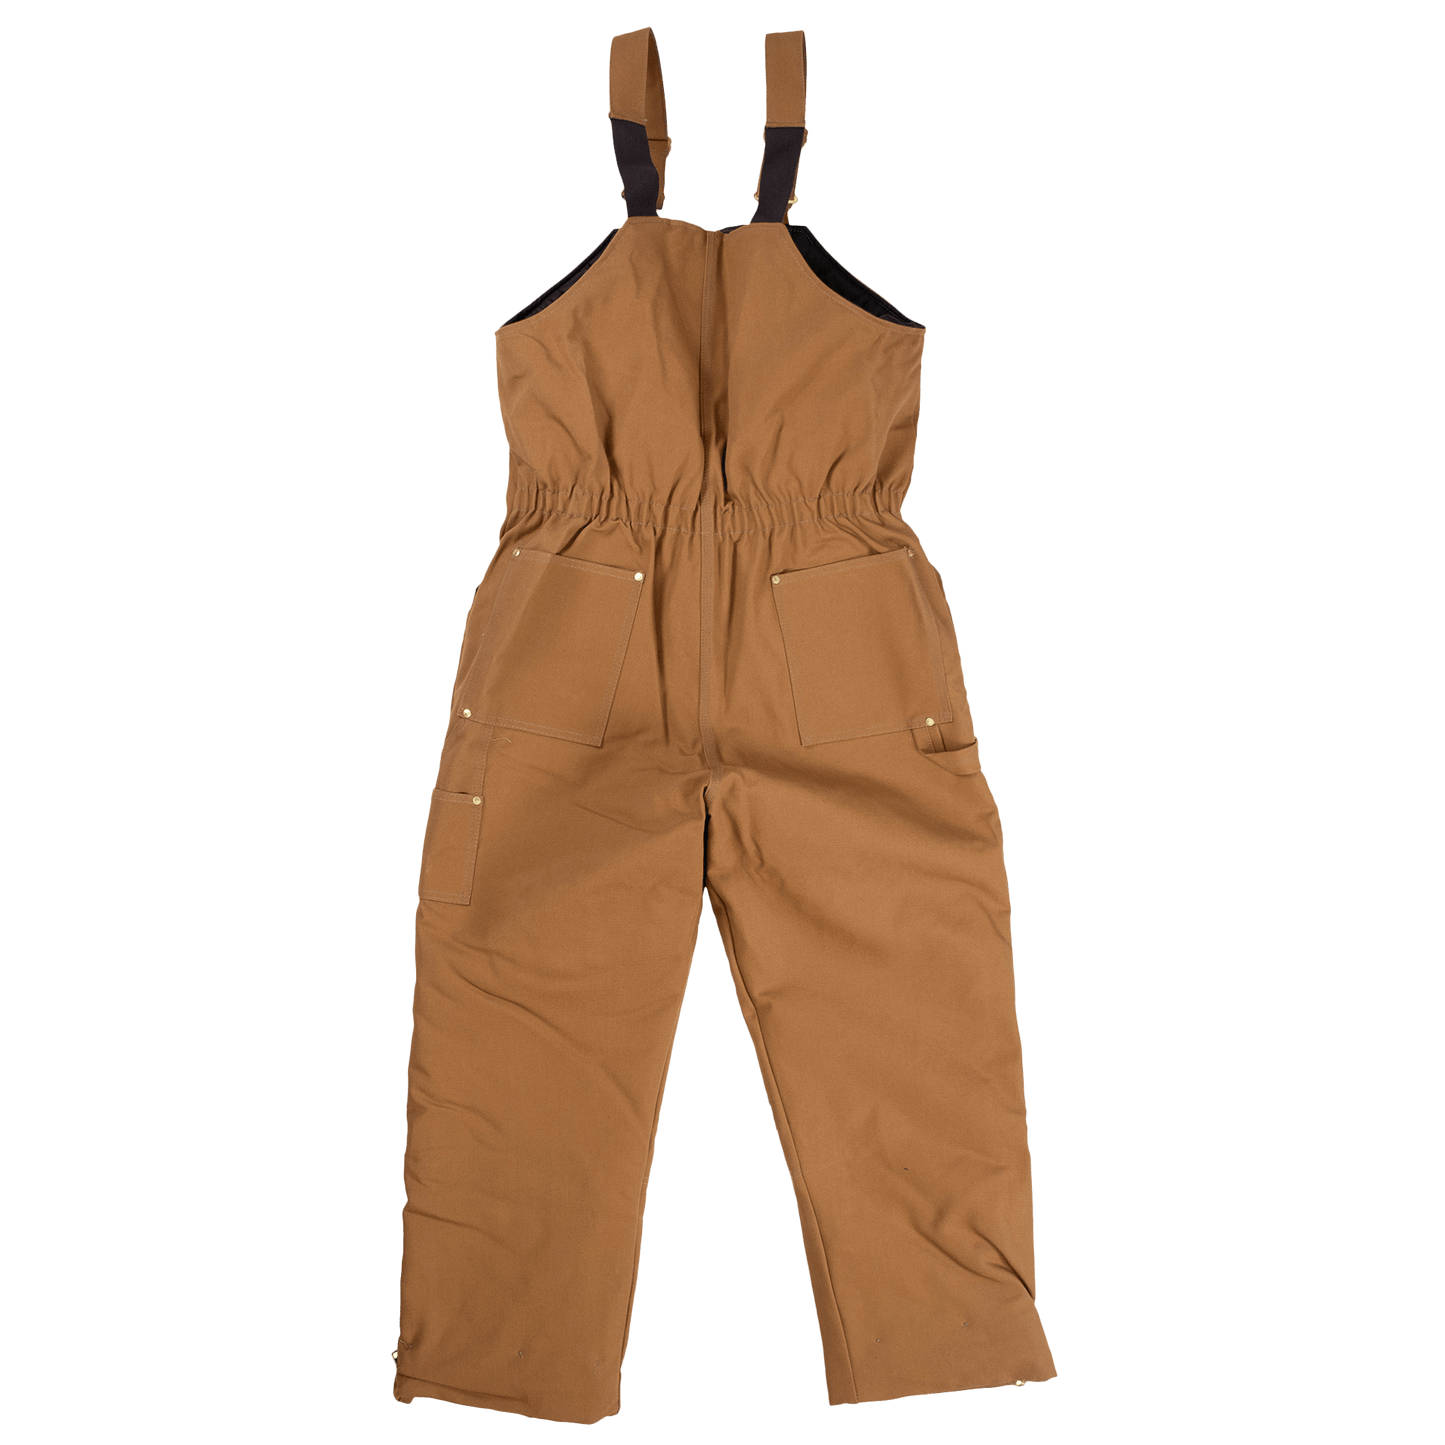 Tough Duck Insulated Bib Overalls - 7537 - Brown - back